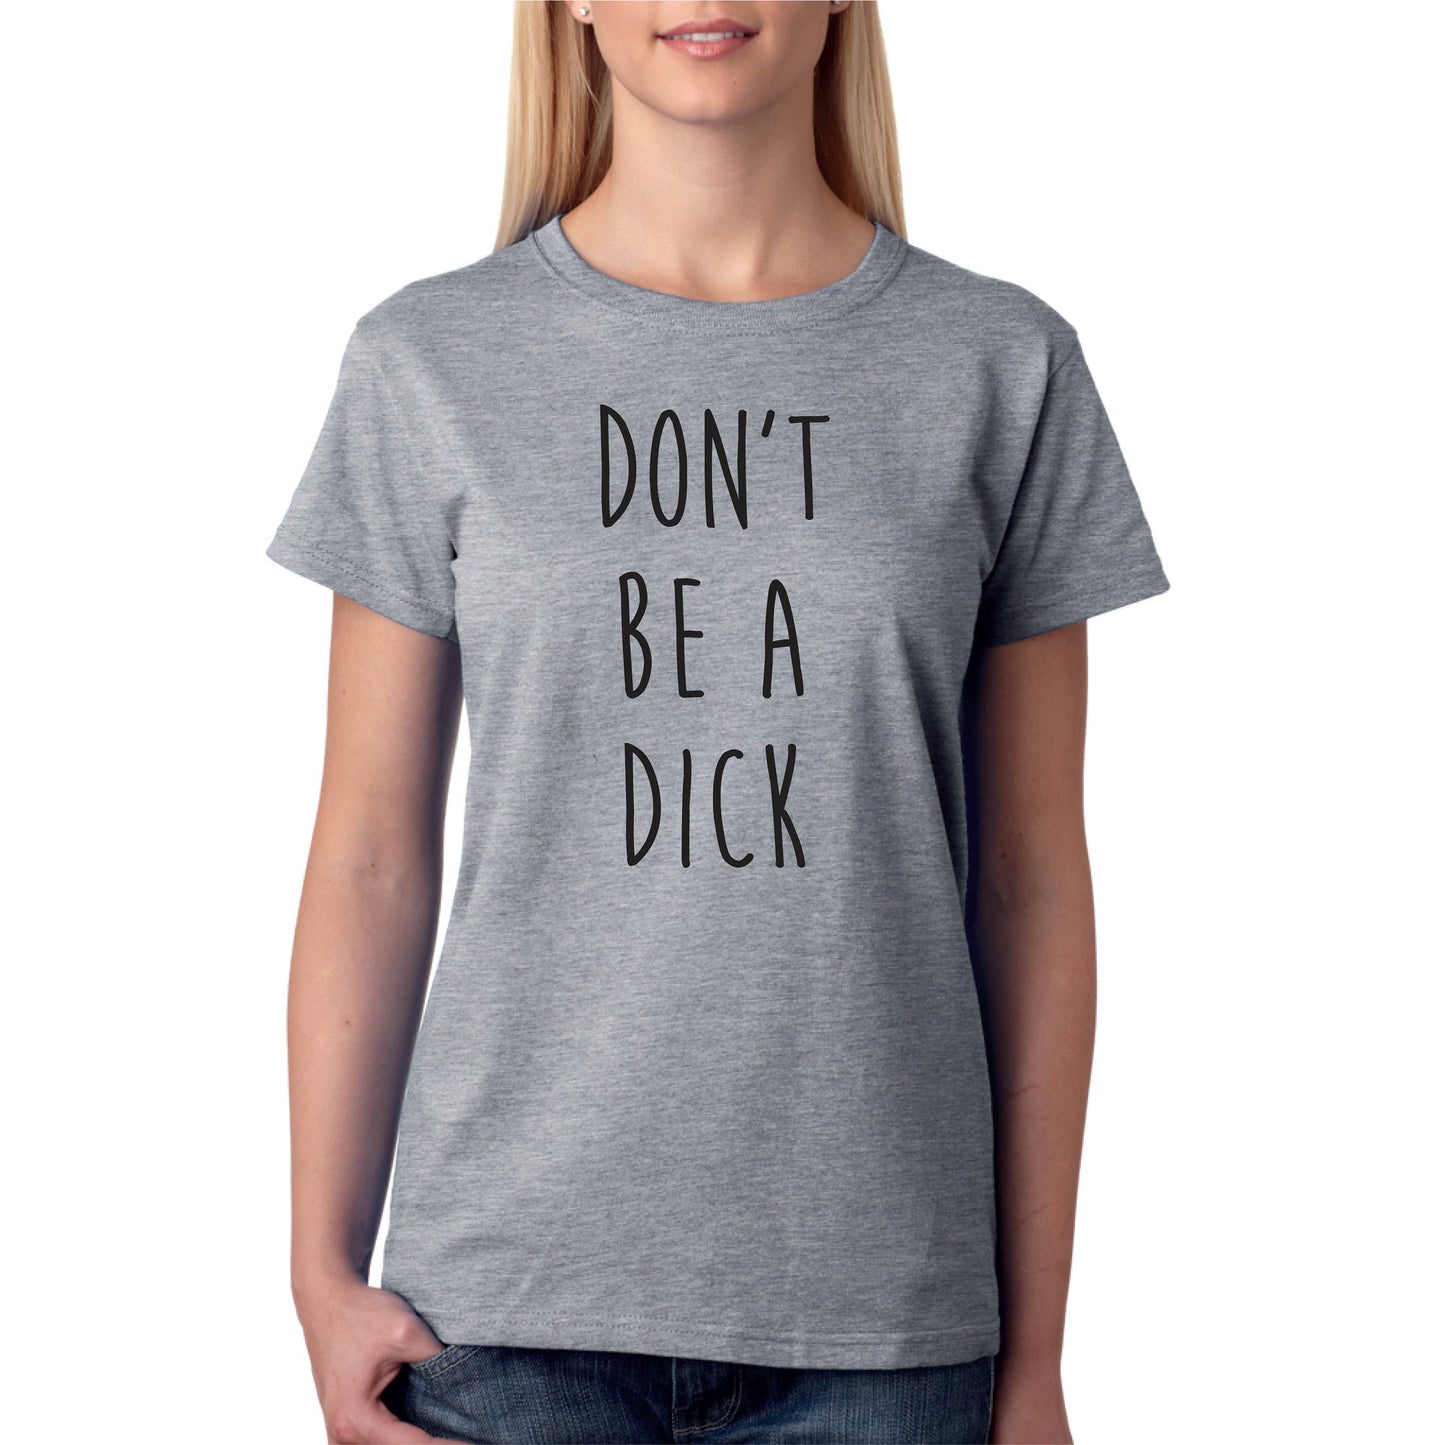 Don't Be A Dick T-Shirt - Funny Rude Joke Cool Tee Top Sarcastic